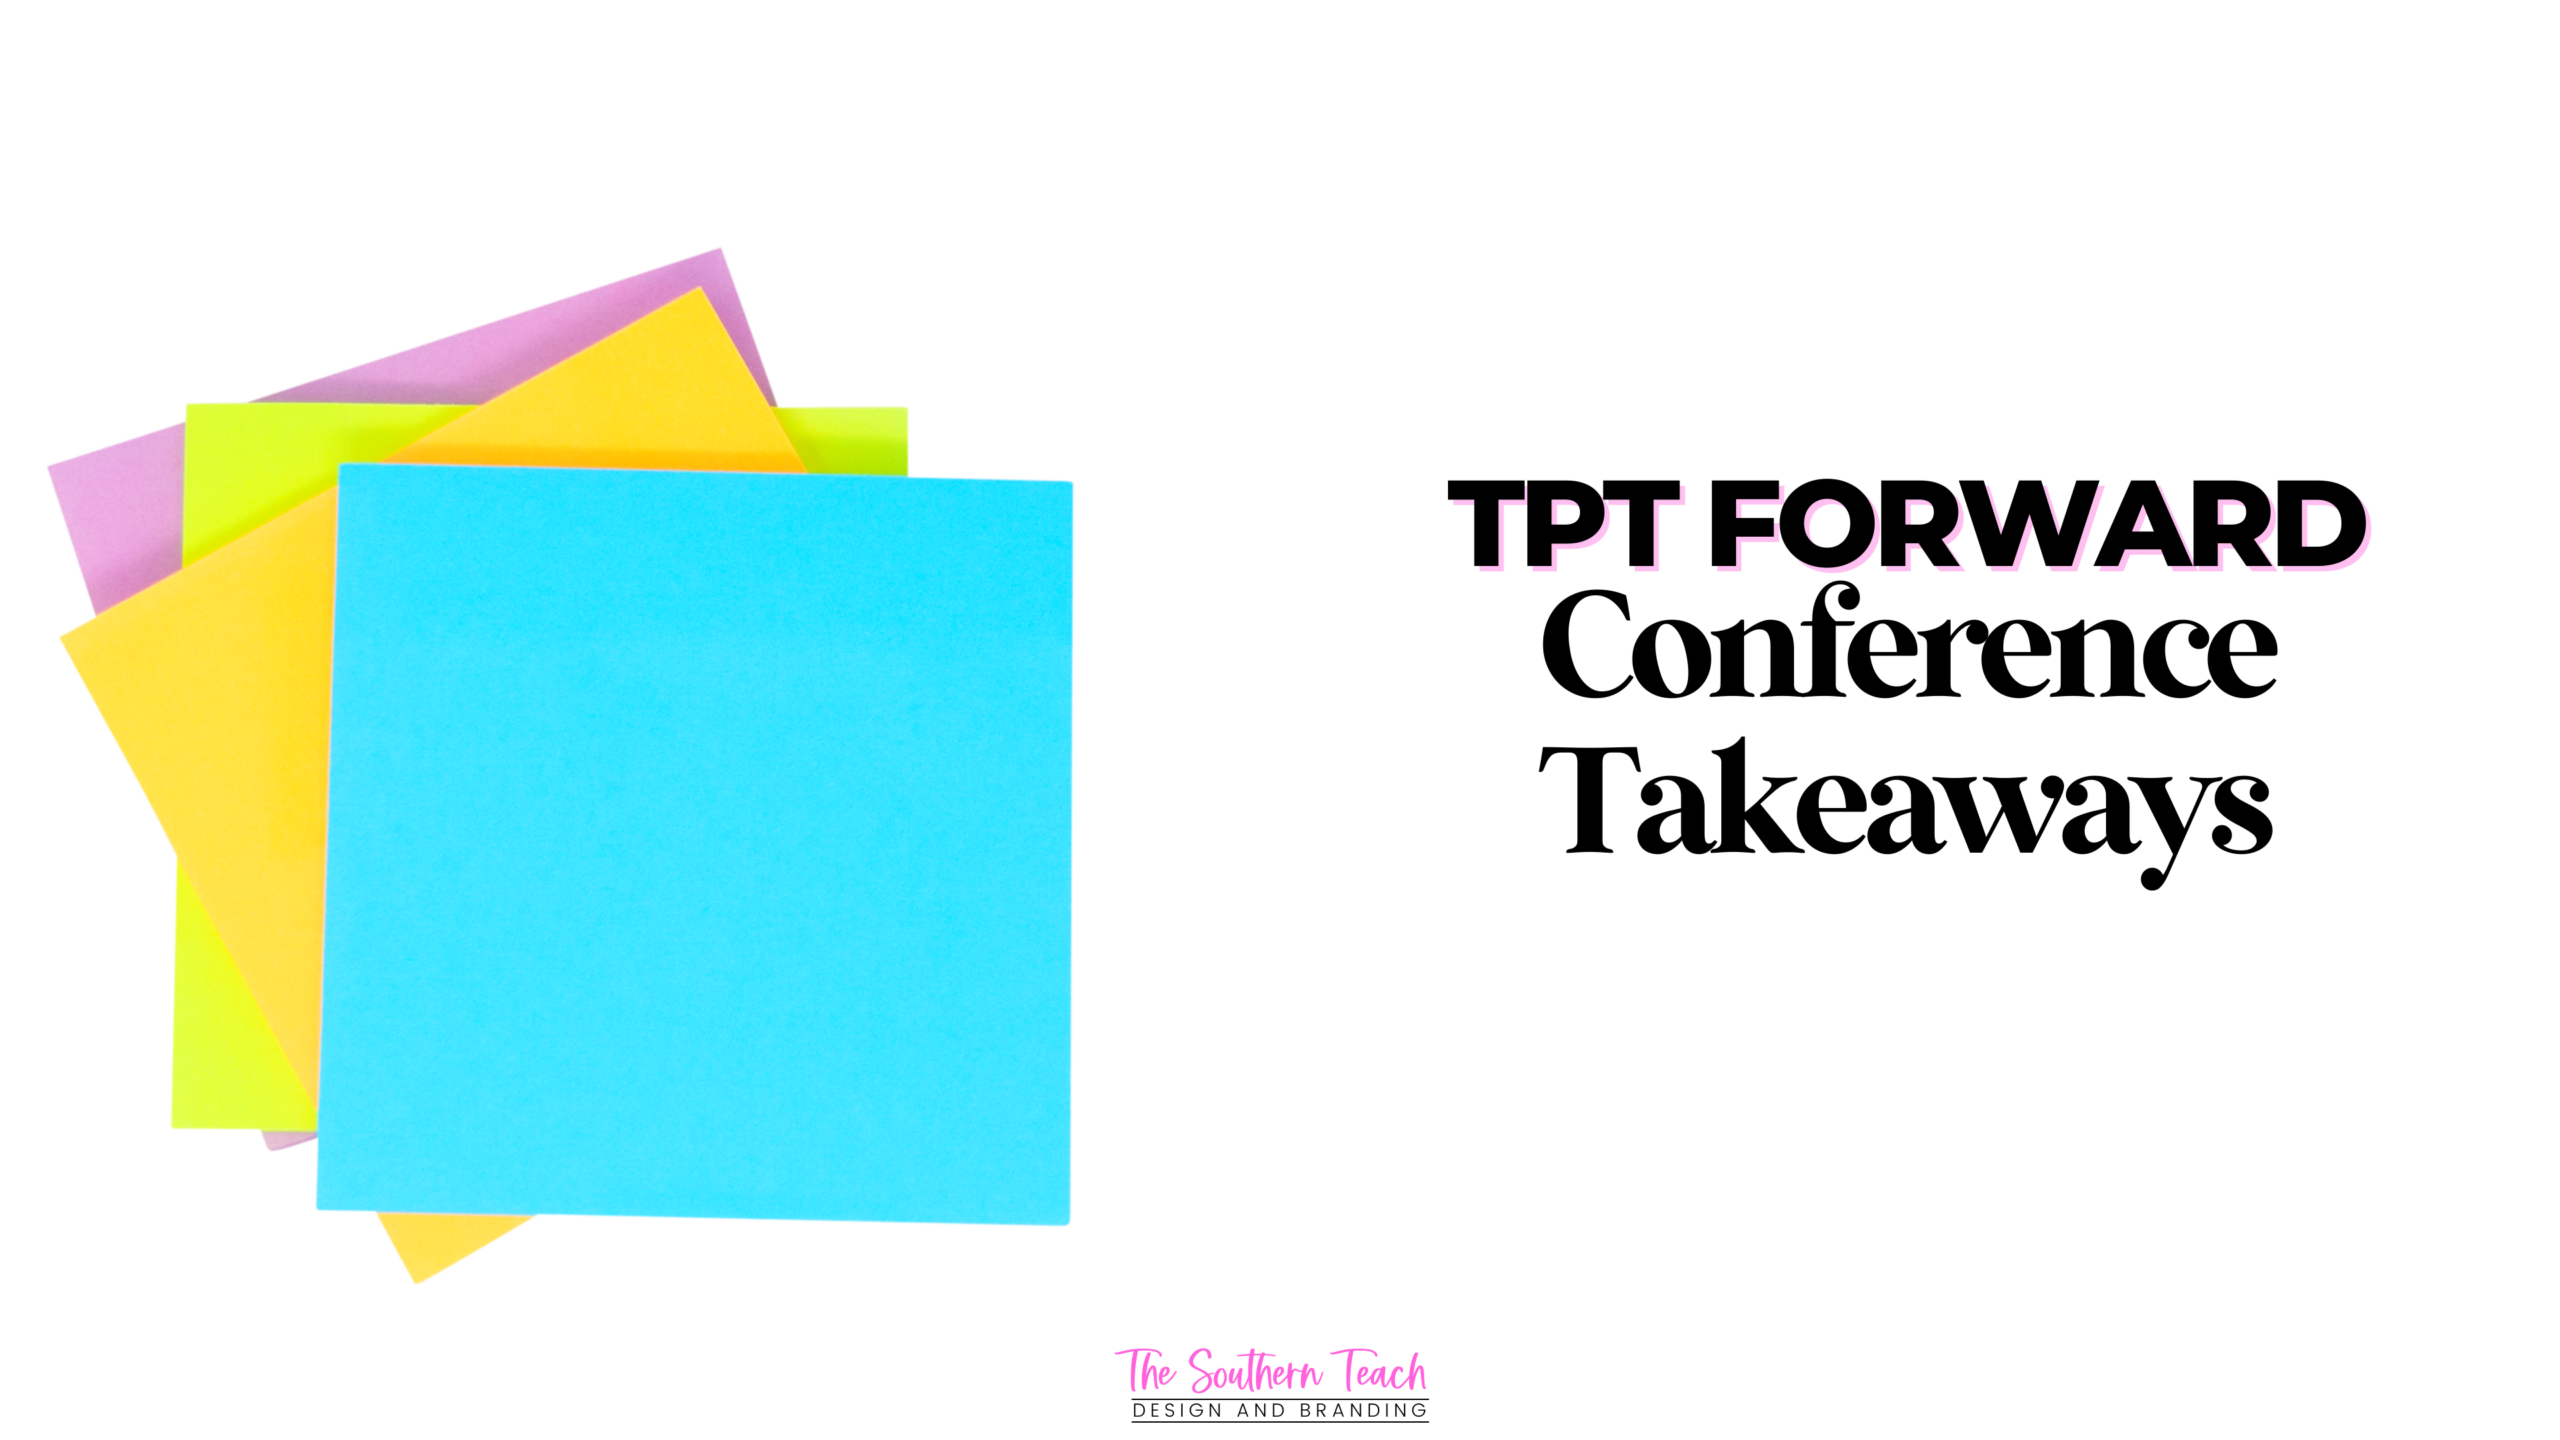 TPT Forward Conference Takeaways